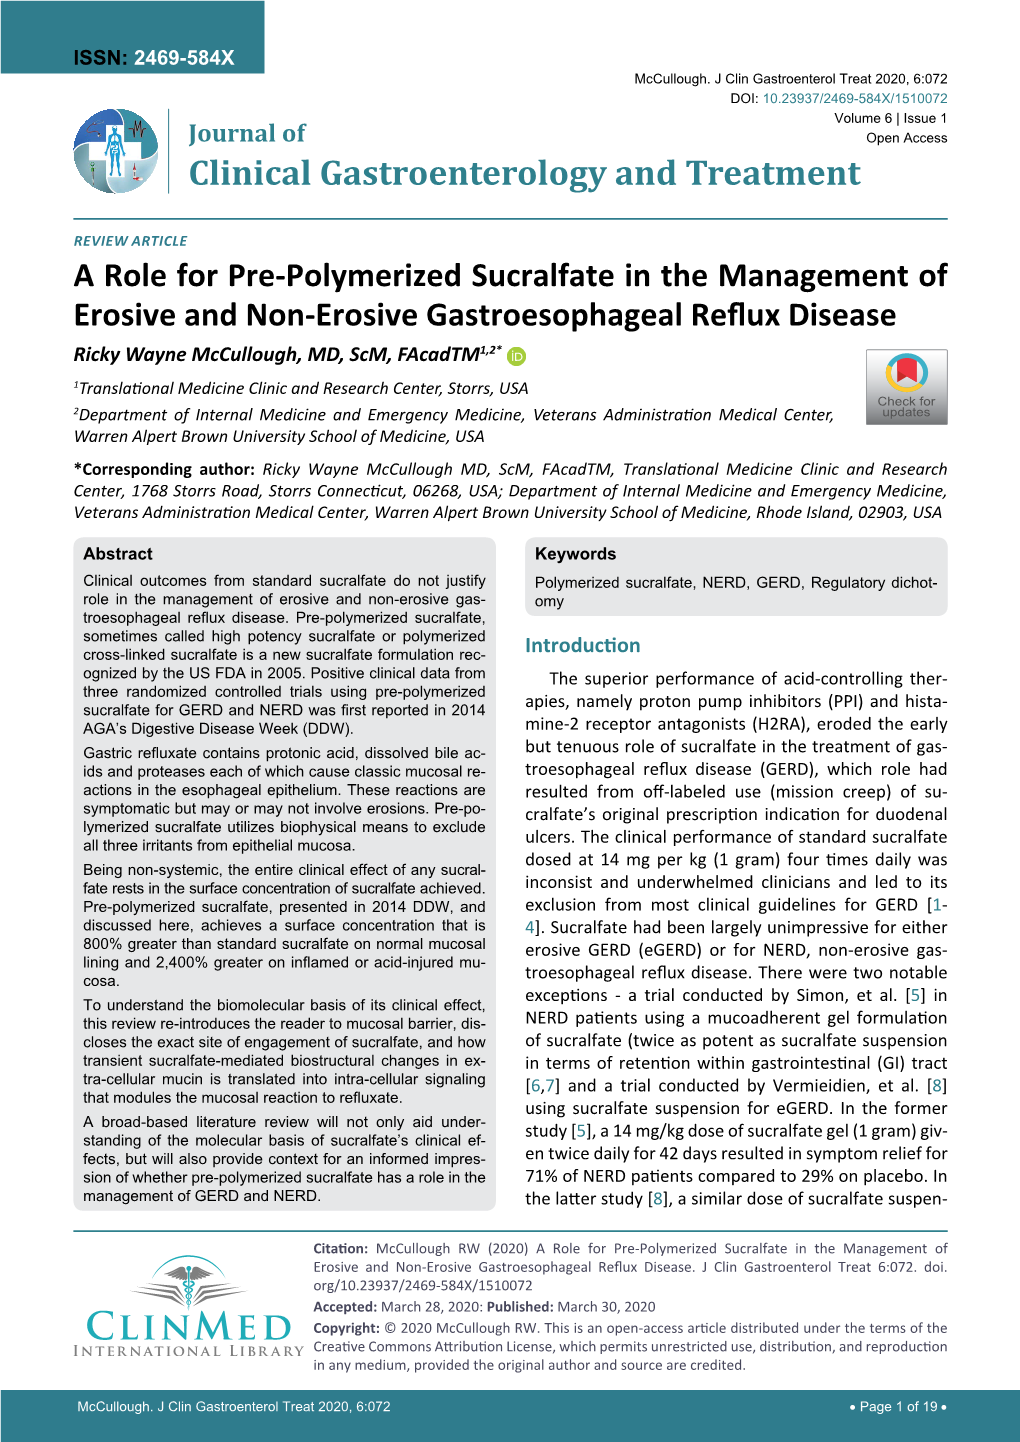 A Role for Pre-Polymerized Sucralfate in the Management of Erosive And